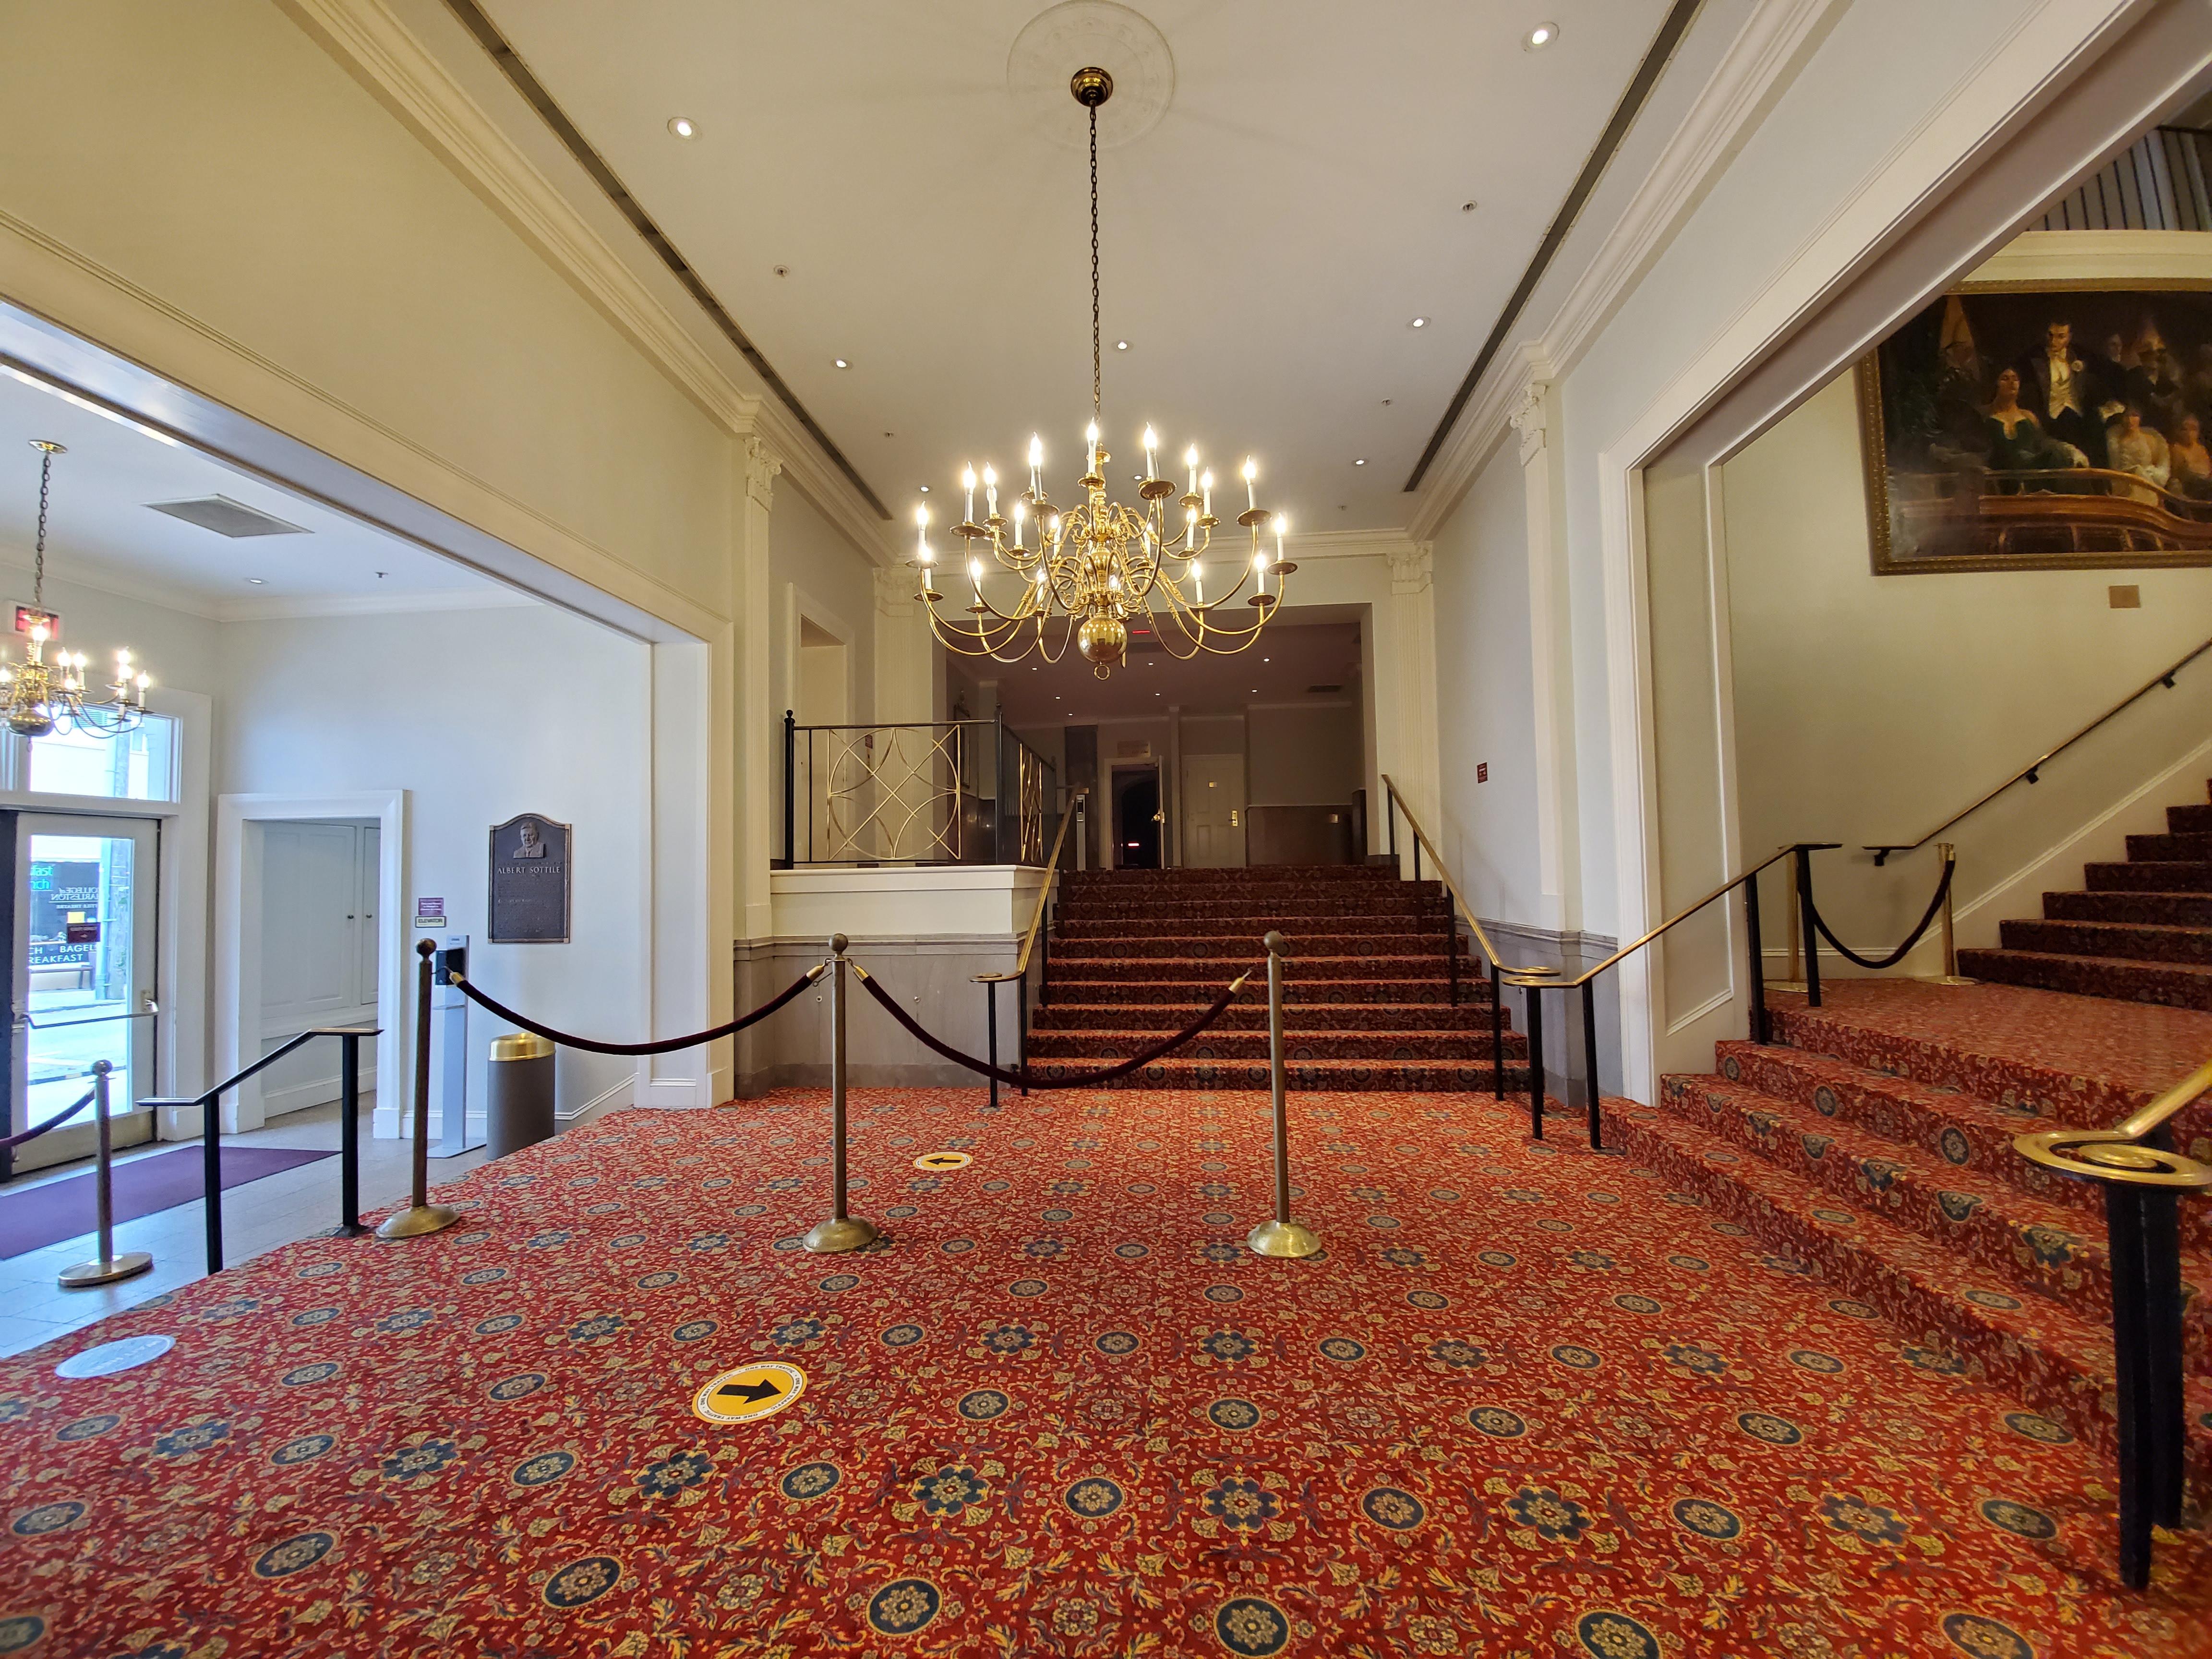 Main Lobby view of staircases and exit